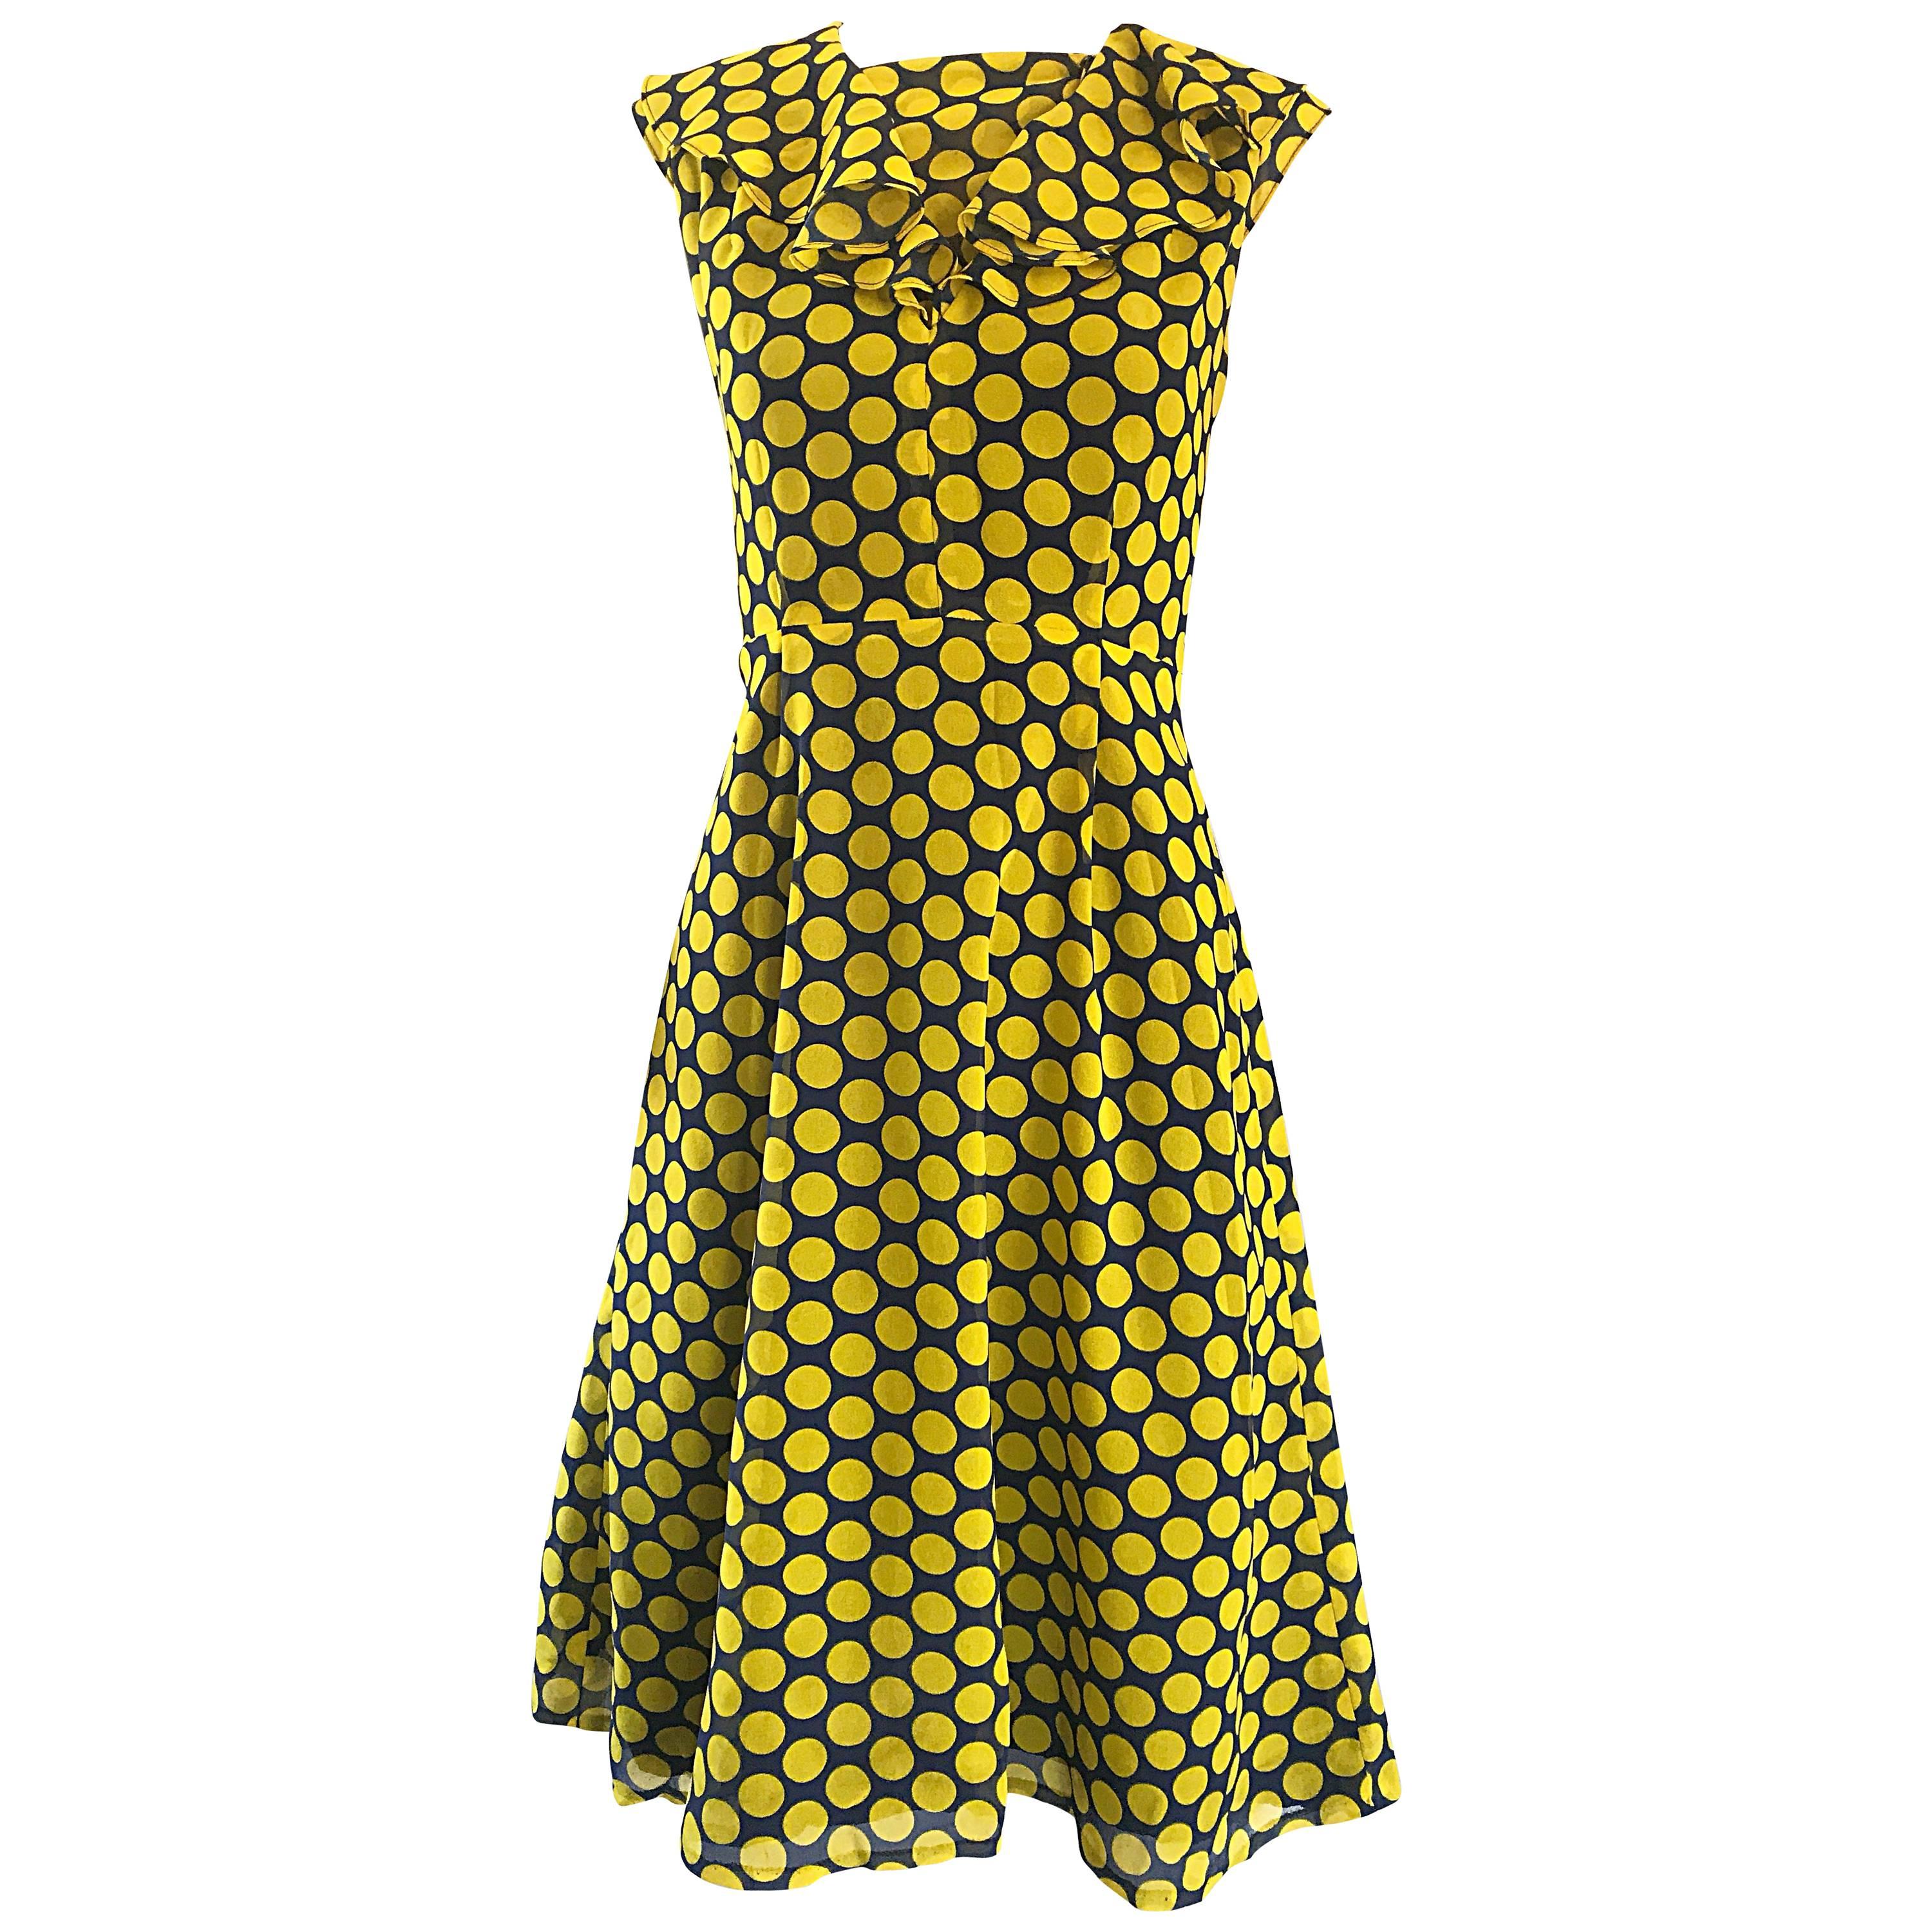 Chic 1970s Yellow and Navy Blue Polka Dot Chiffon A - Line Vintage 70s Day Dress